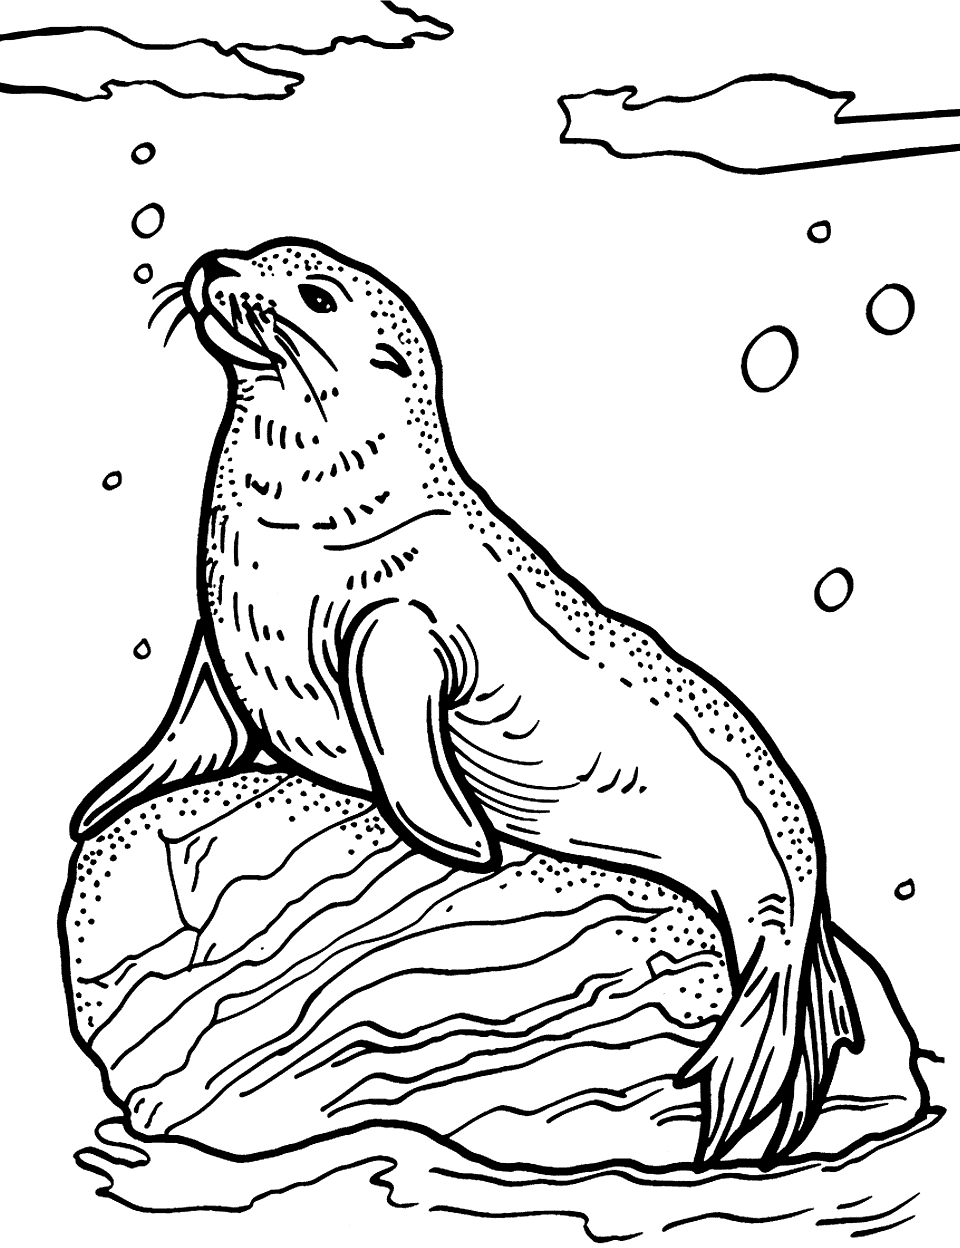 Sea Lion Basking on a Rock Creature Coloring Page - A sea lion lounges comfortably on a large rock, enjoying the sun.